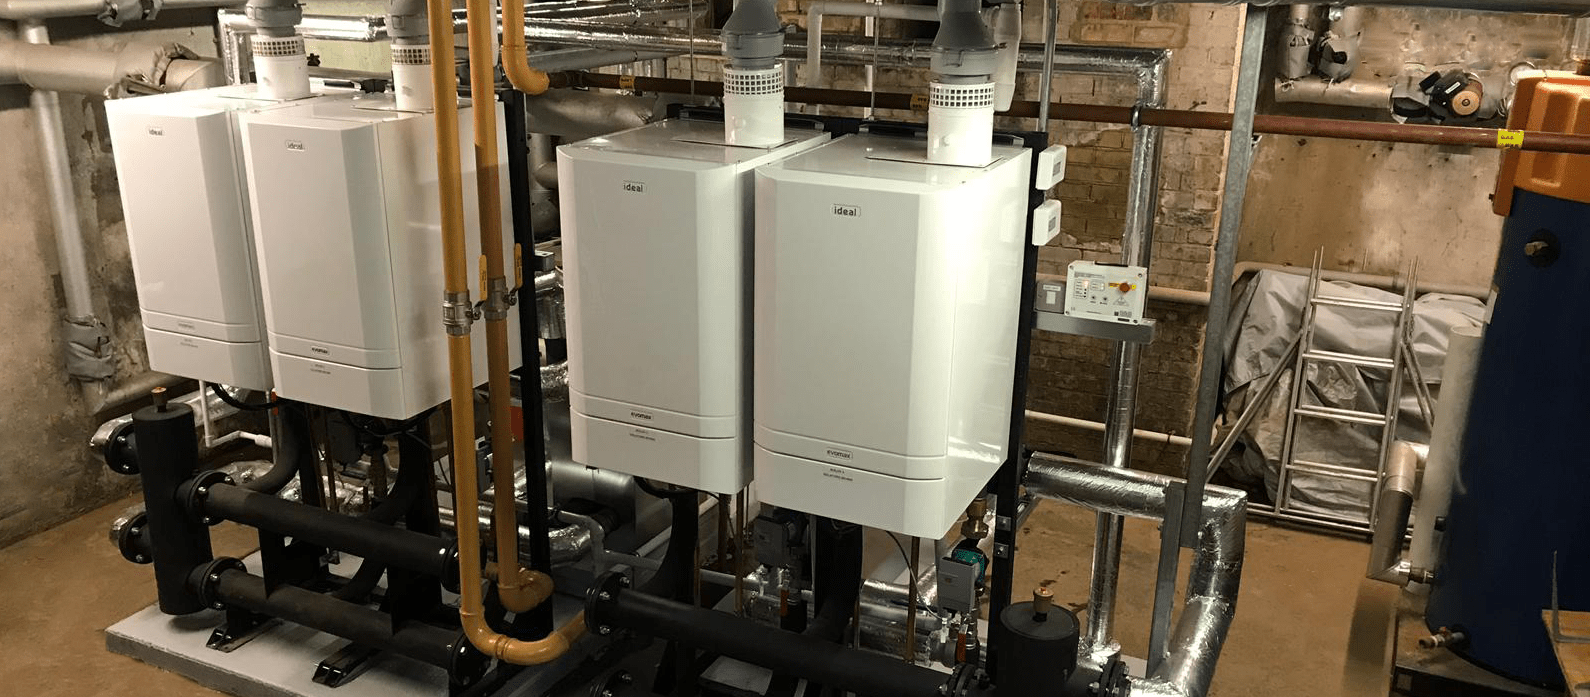 diep Afname Voorkomen Commercial Boilers South London | Cowley Group, Commercial boilers